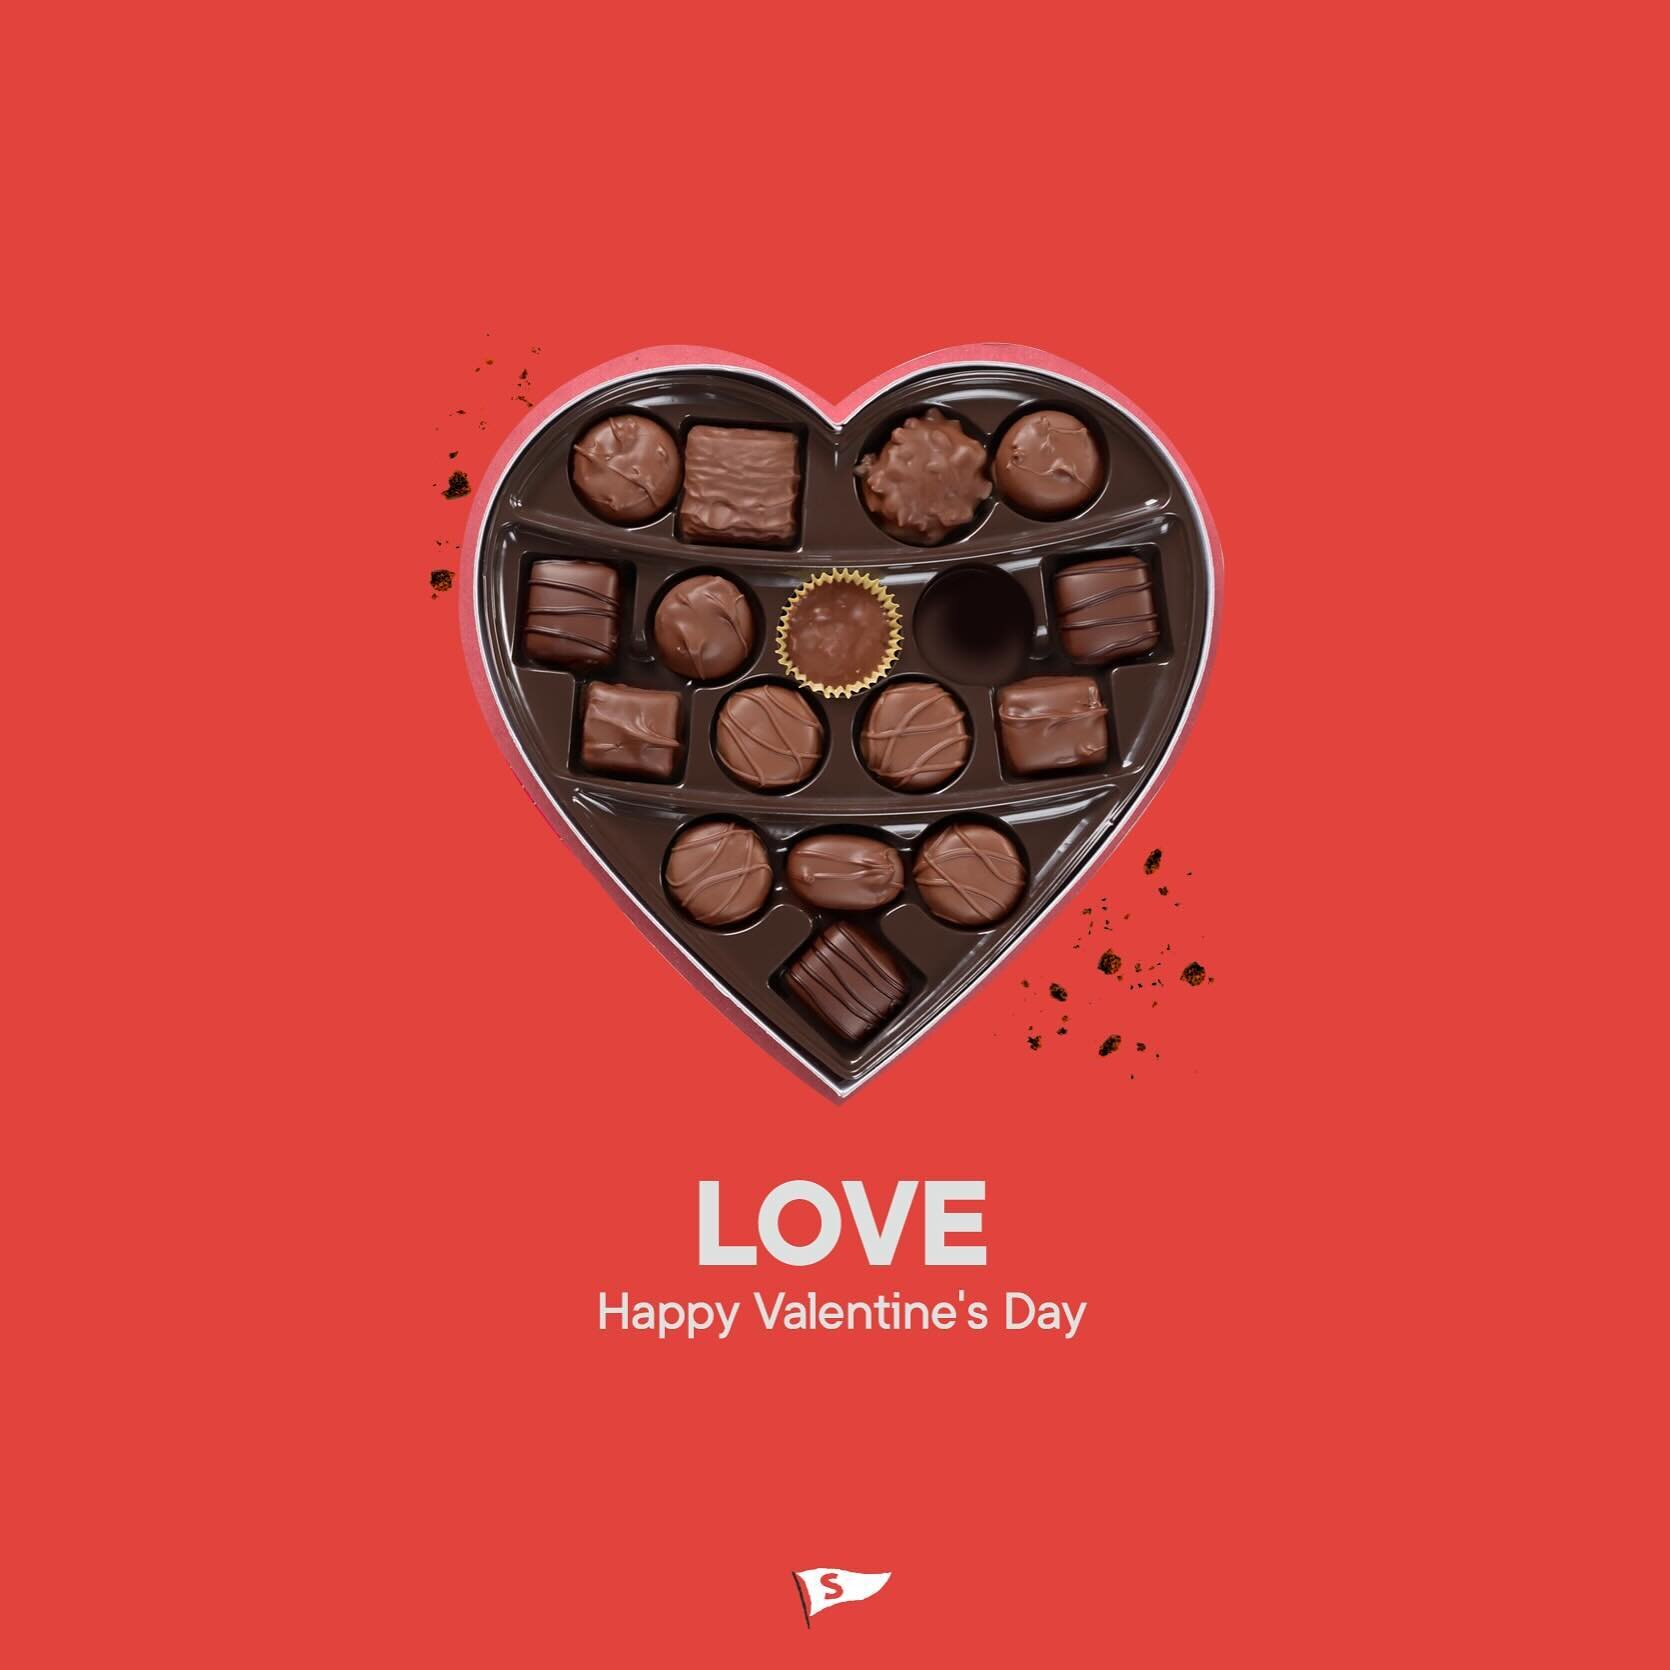 Let's admit it: It's all about getting the chocolate. Happy Valentine's Day. 
.
.
#ValentinesDay #ValentinesDay2024 #BoxOfChocolates #CreativeStudio #CreativeAgency #AdvertisingStudio #AdvertisingAgency #BrandingAgency #LehighValley #Philadelphia